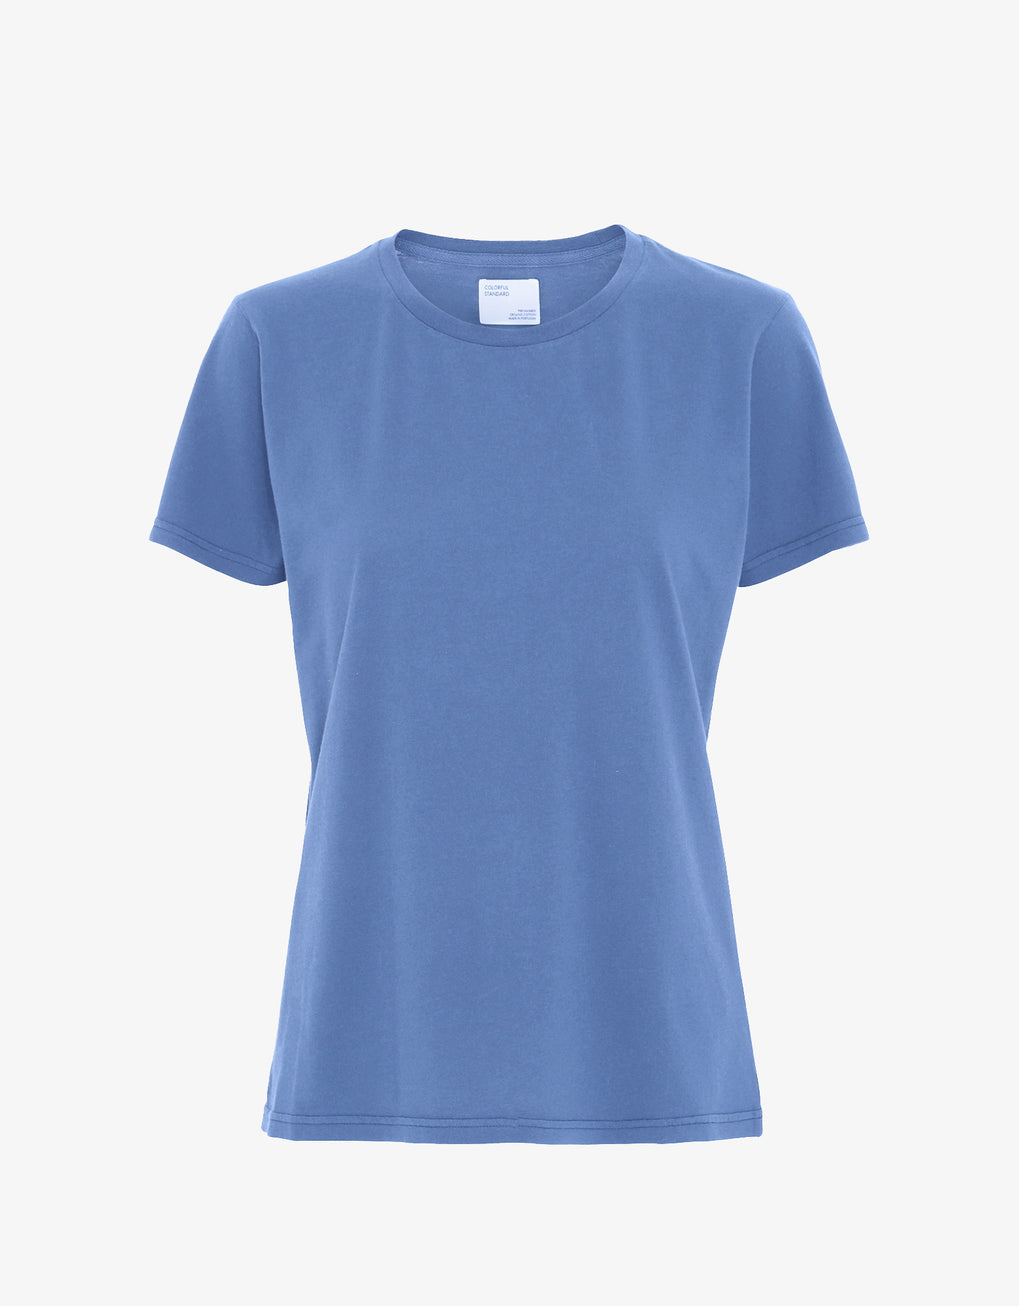 LIGHT T-SHIRT BY COLORFUL STANDARD